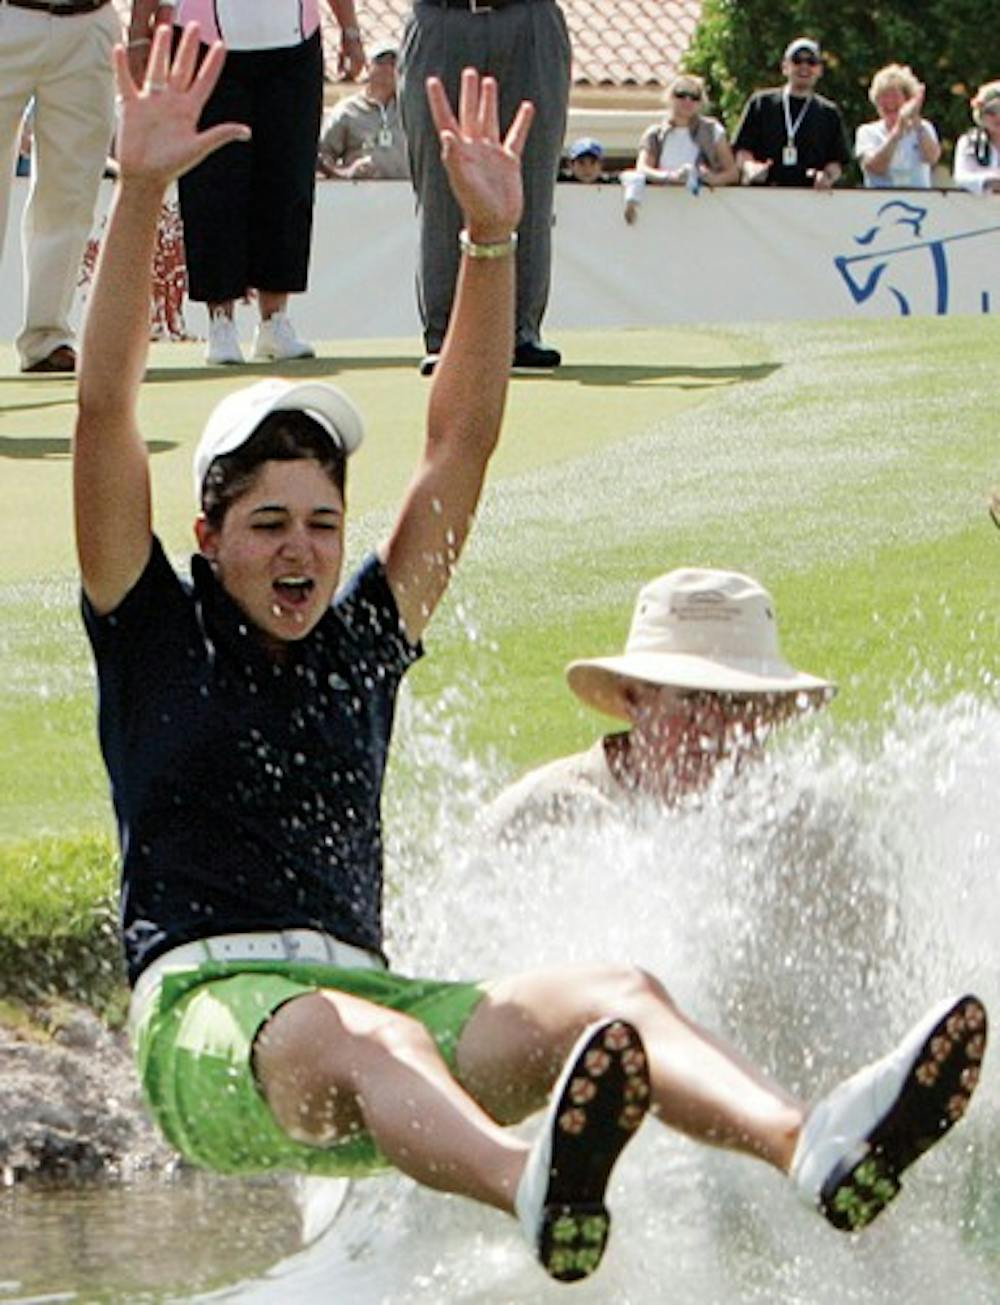 ** FILE ** This April 6, 2008 file photo shows Lorena Ochoa of Mexico, left, plunging into the lake alongside the 18th green after her victory in the LPGA Kraft Nabisco Championship golf tournament at Mission Hills Country Club in Rancho Mirage, Calif., in this April 6, 2008 file photo. Ochoa now has won four of five tournaments this year by a combined 34 shots, and goes for another victory this week at the Ginn Open.  (AP Photo/Reed Saxon, File)